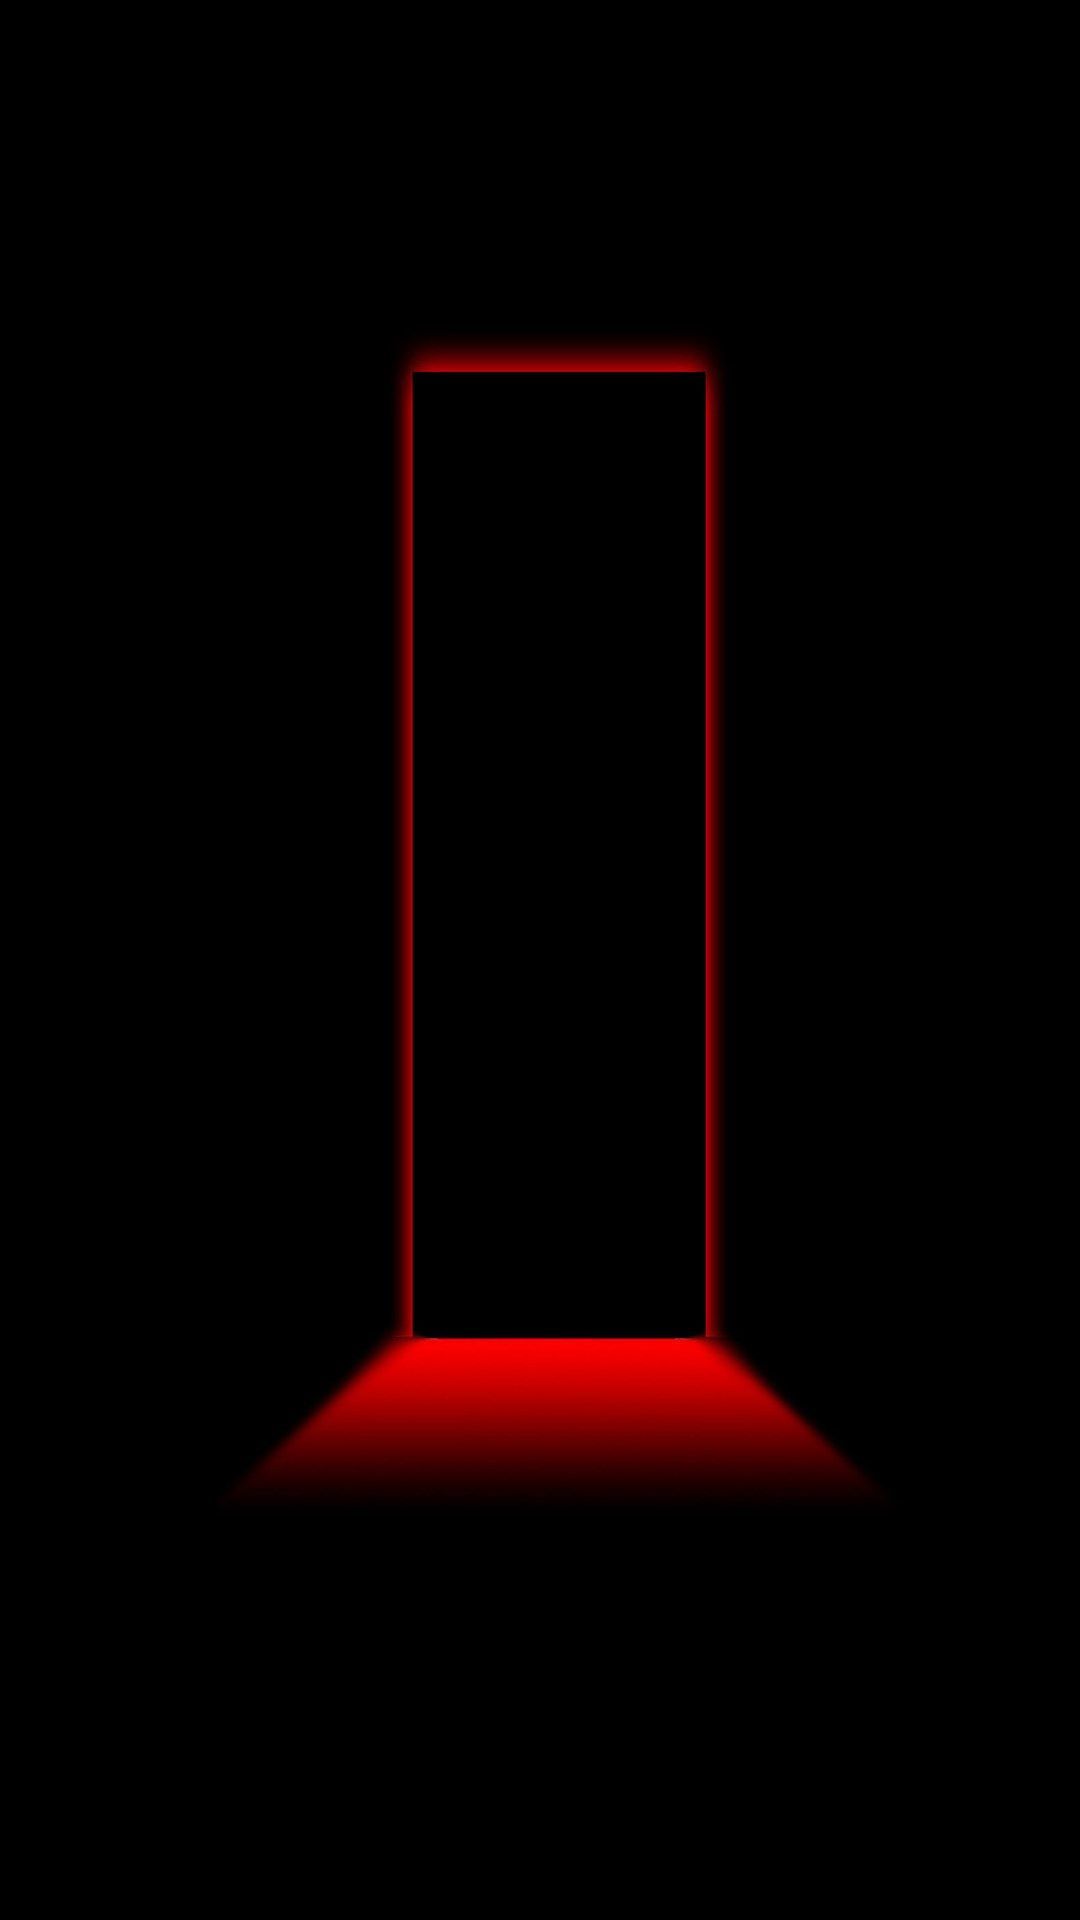 Black and Red Line Wallpaper Free Black and Red Line Background